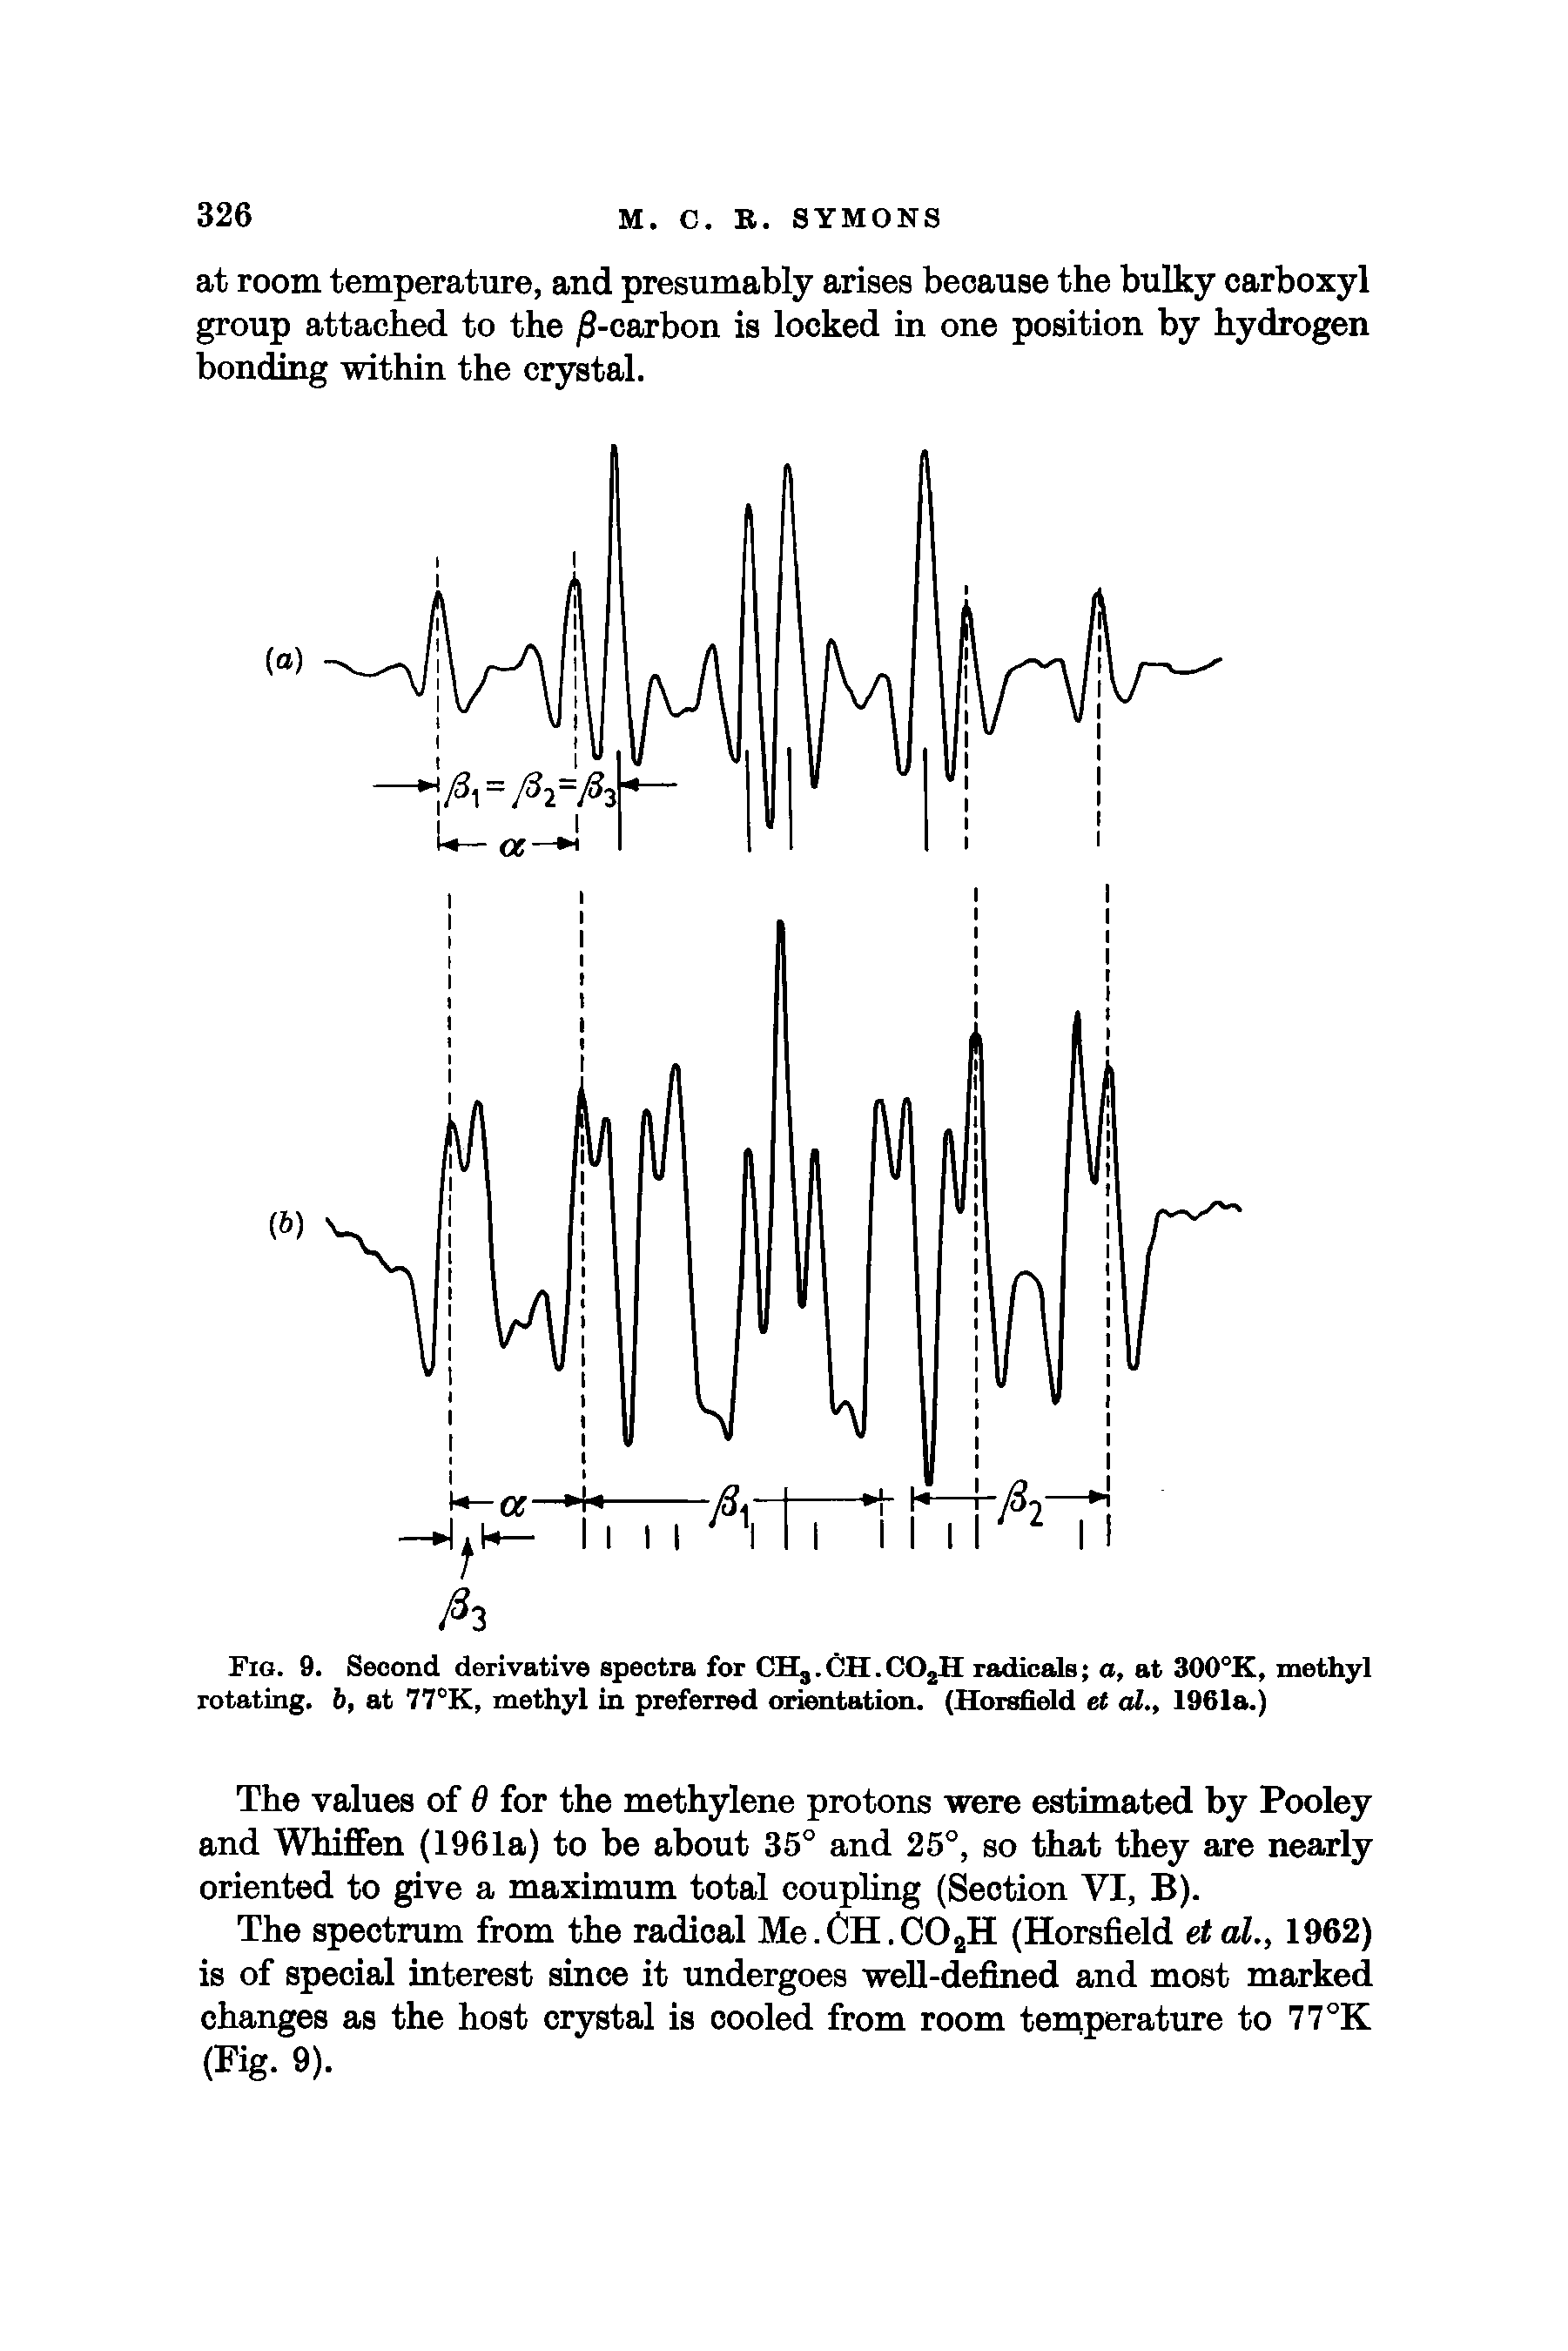 Fig. 9. Second derivative spectra for CHj.CH.C02H radicals o, at 300°K, methyl rotating, b, at 77°K, methyl in preferred orientation. (Horsfield et al., 1961a.)...